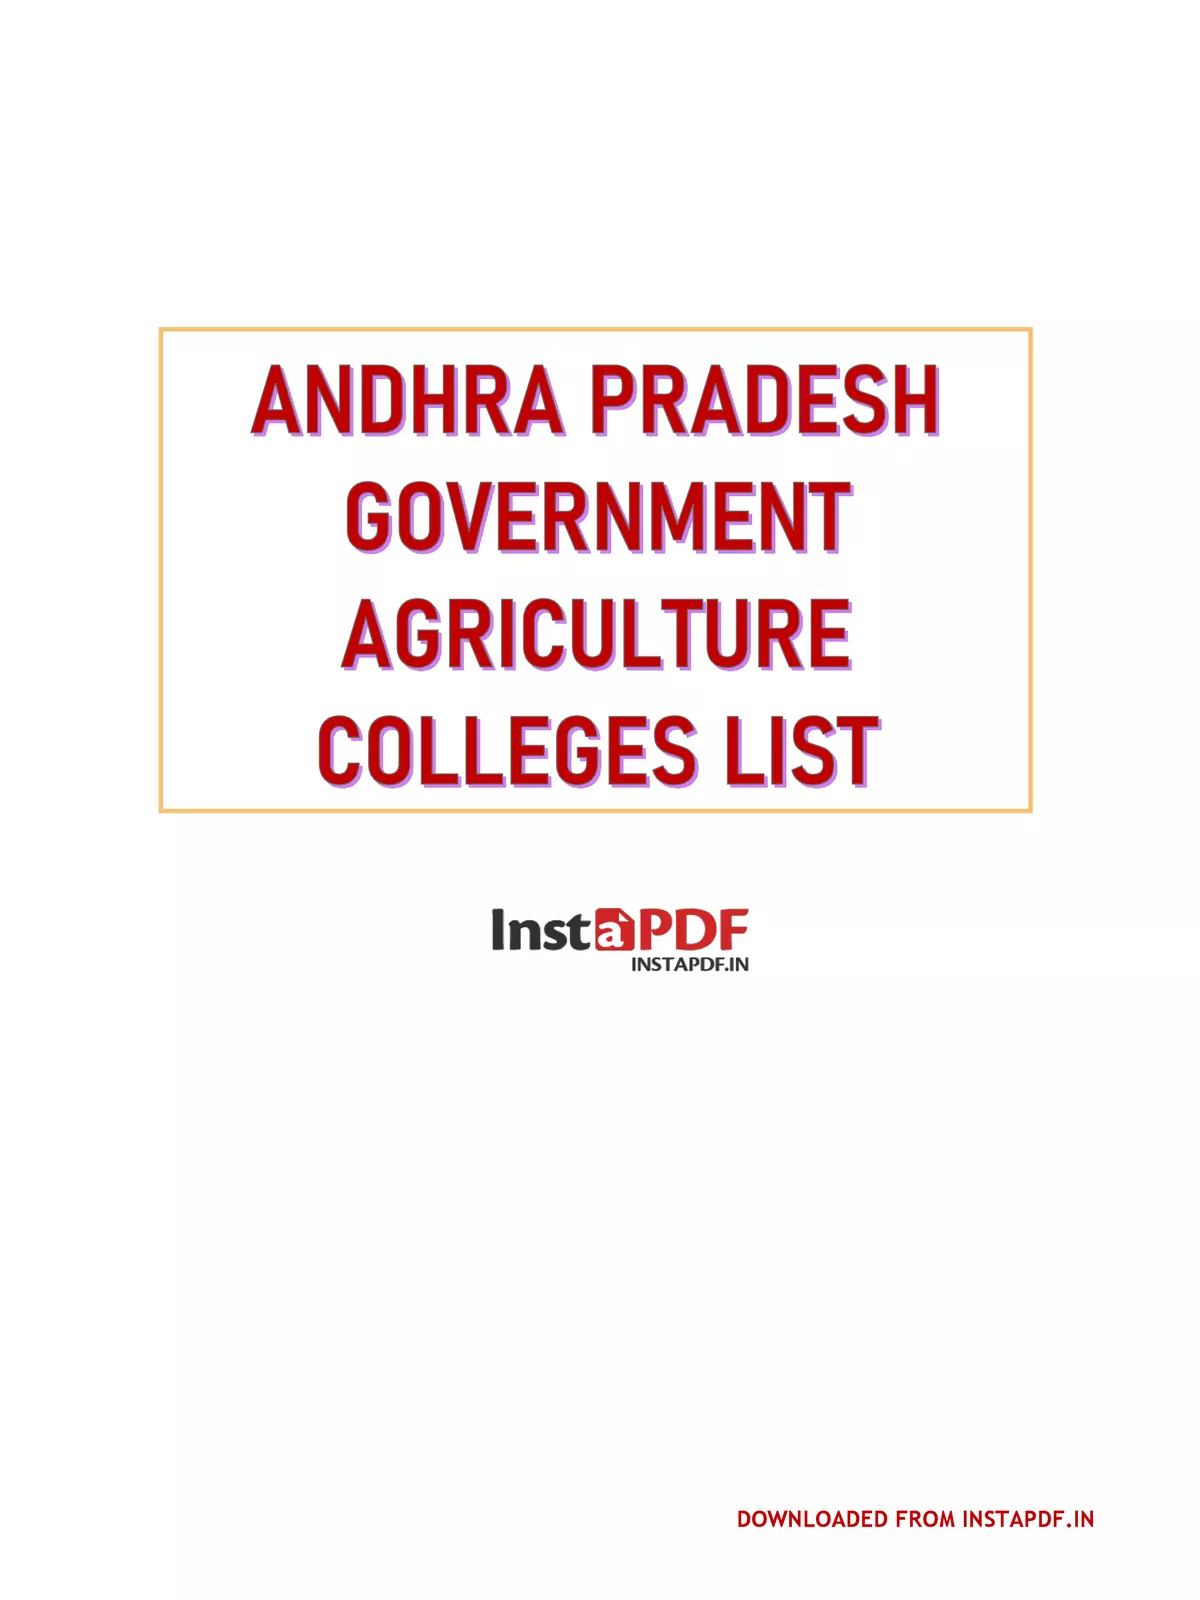 List of Government Agriculture Colleges in AP